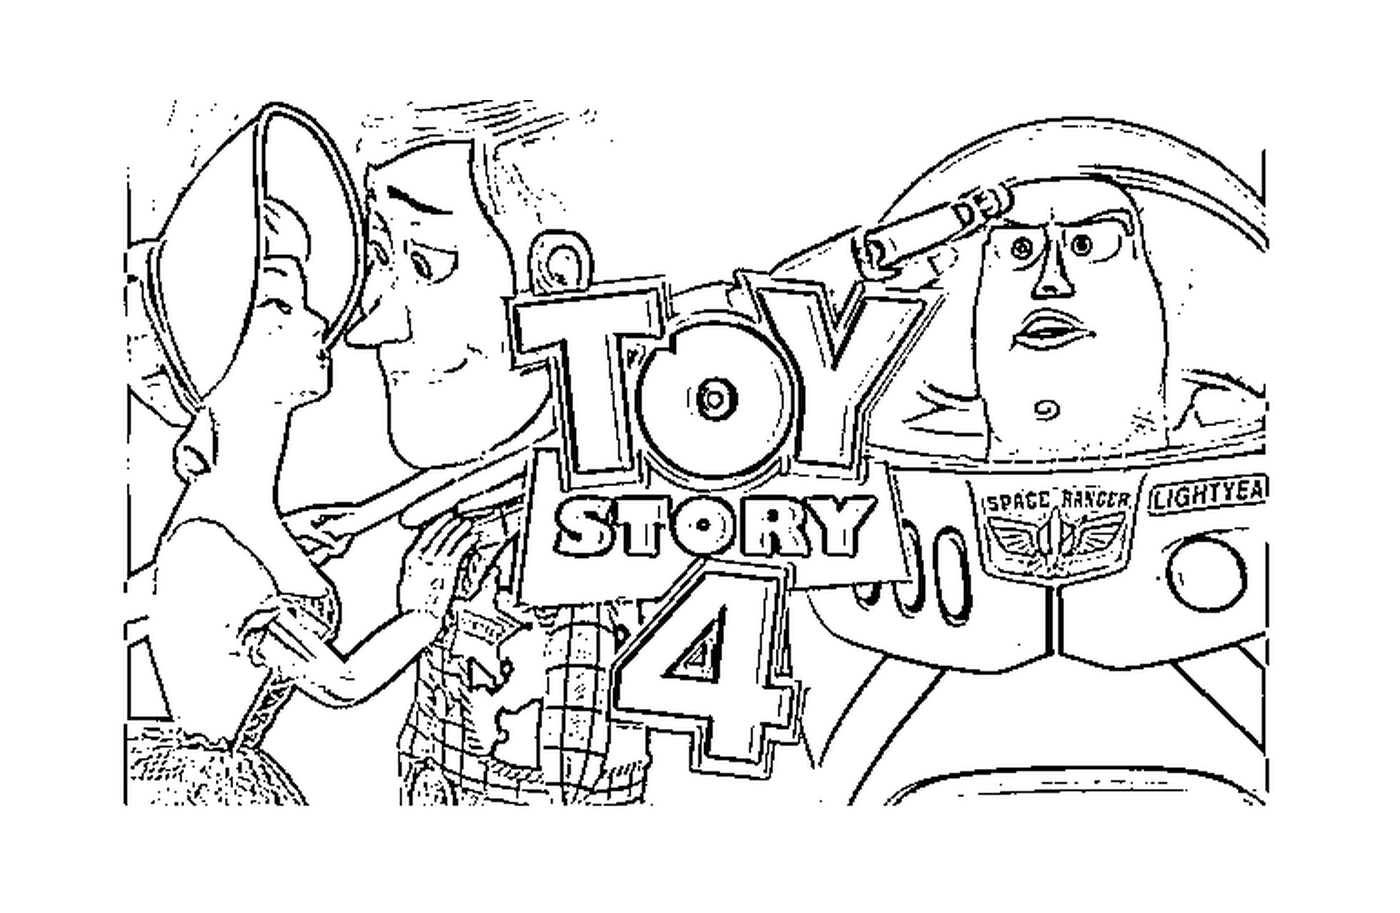  Toy Story 4, exciting new adventure 